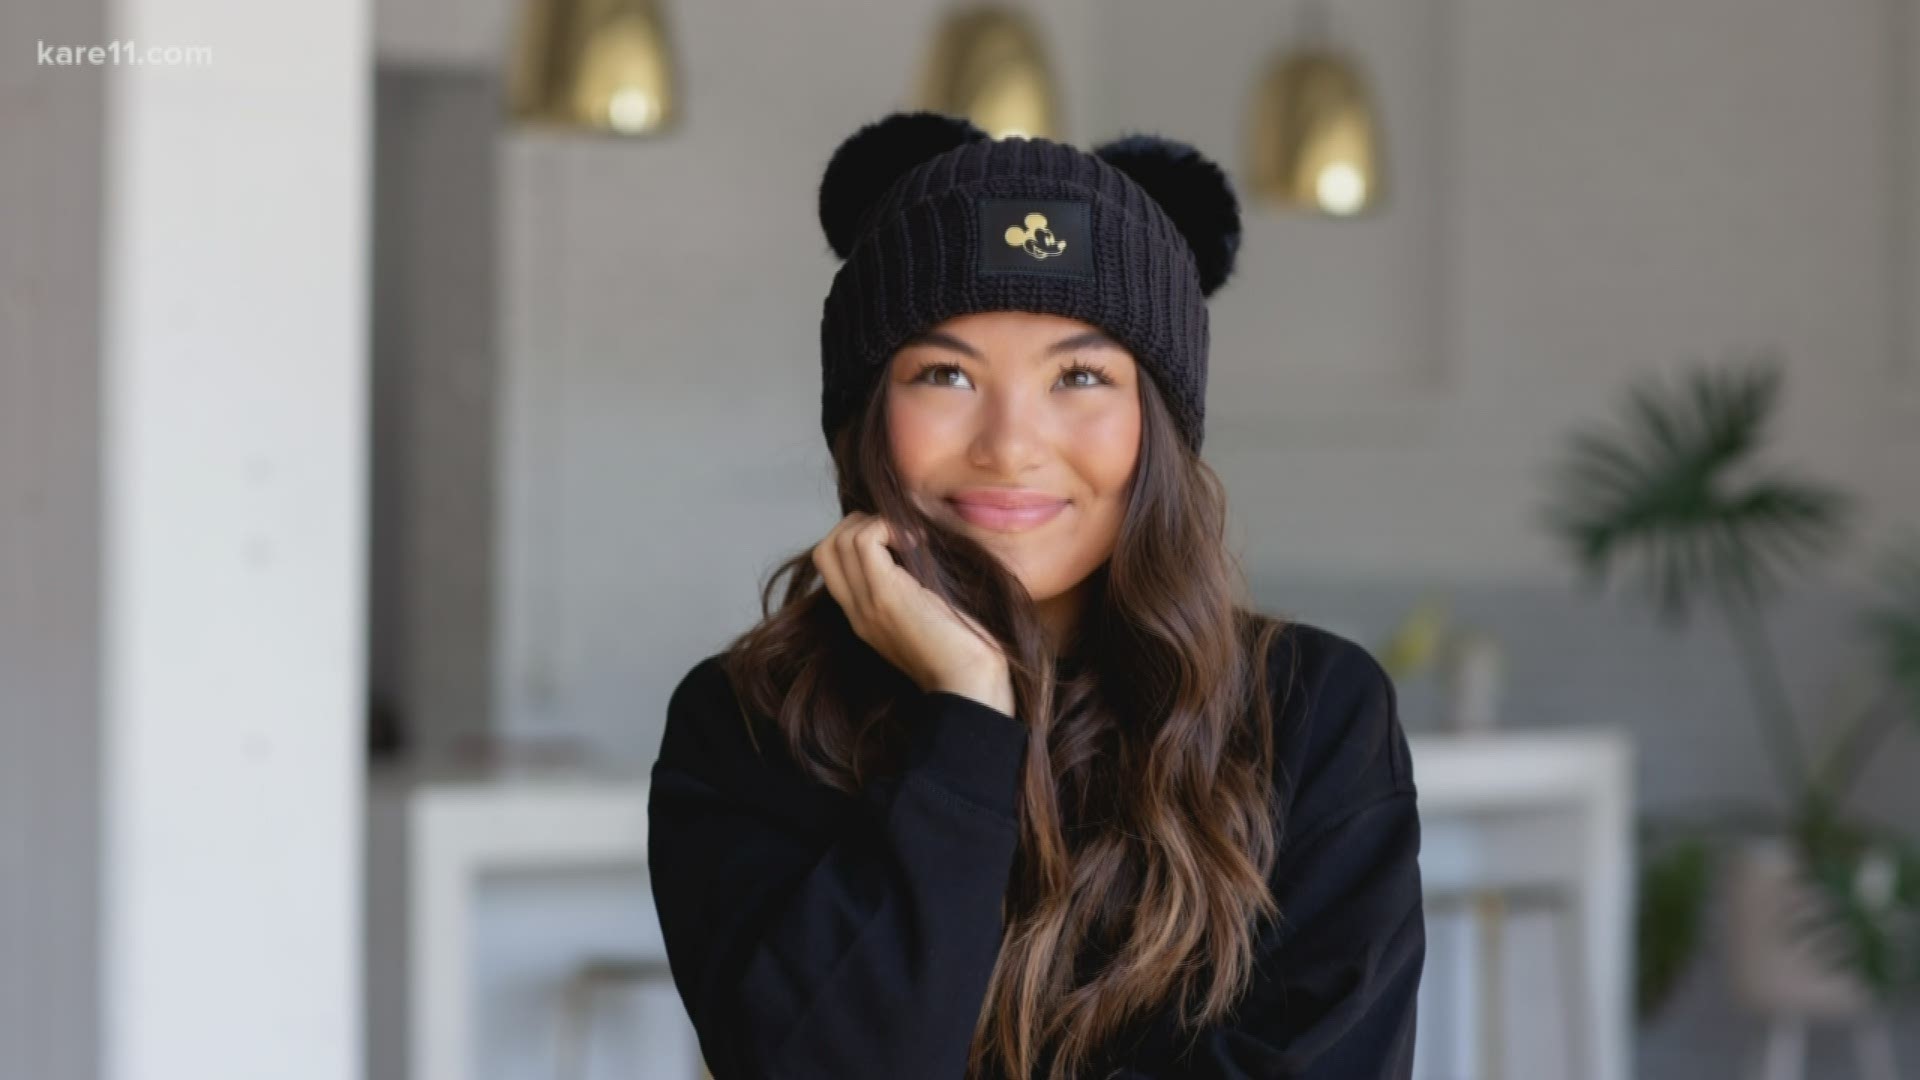 •	Love Your Melon is a mission-driven apparel brand that donates 50% of net profits to nonprofit organizations who lead the fight against pediatric cancer